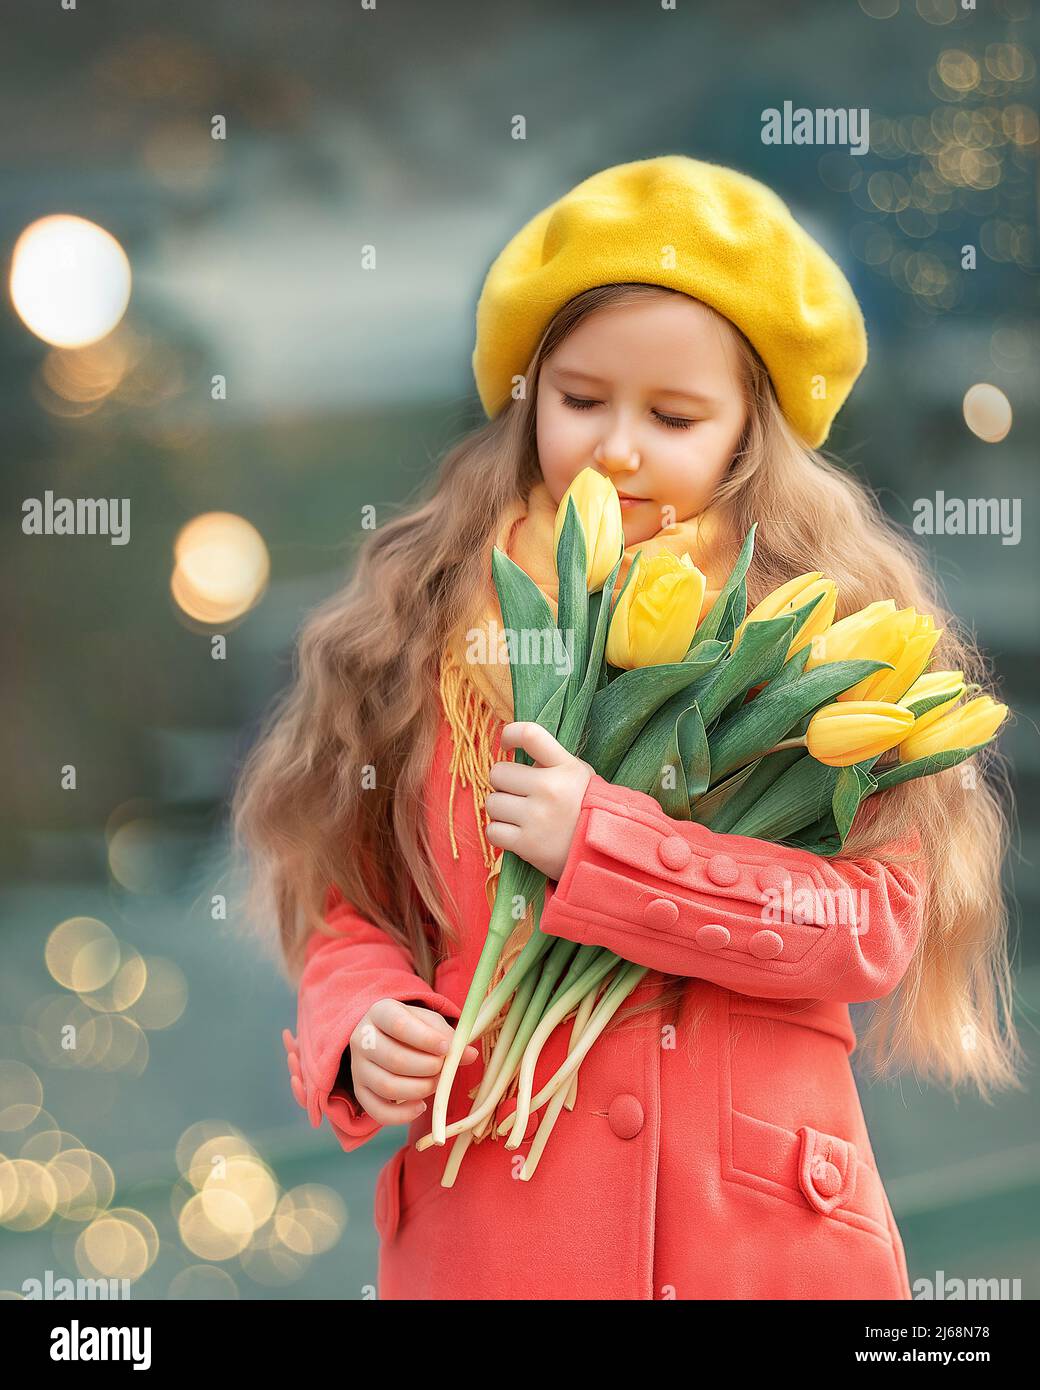 Portrait of a happy girl with a bouquet of yellow tulips on a walk in spring. Flowers for International Women's Day. Stock Photo